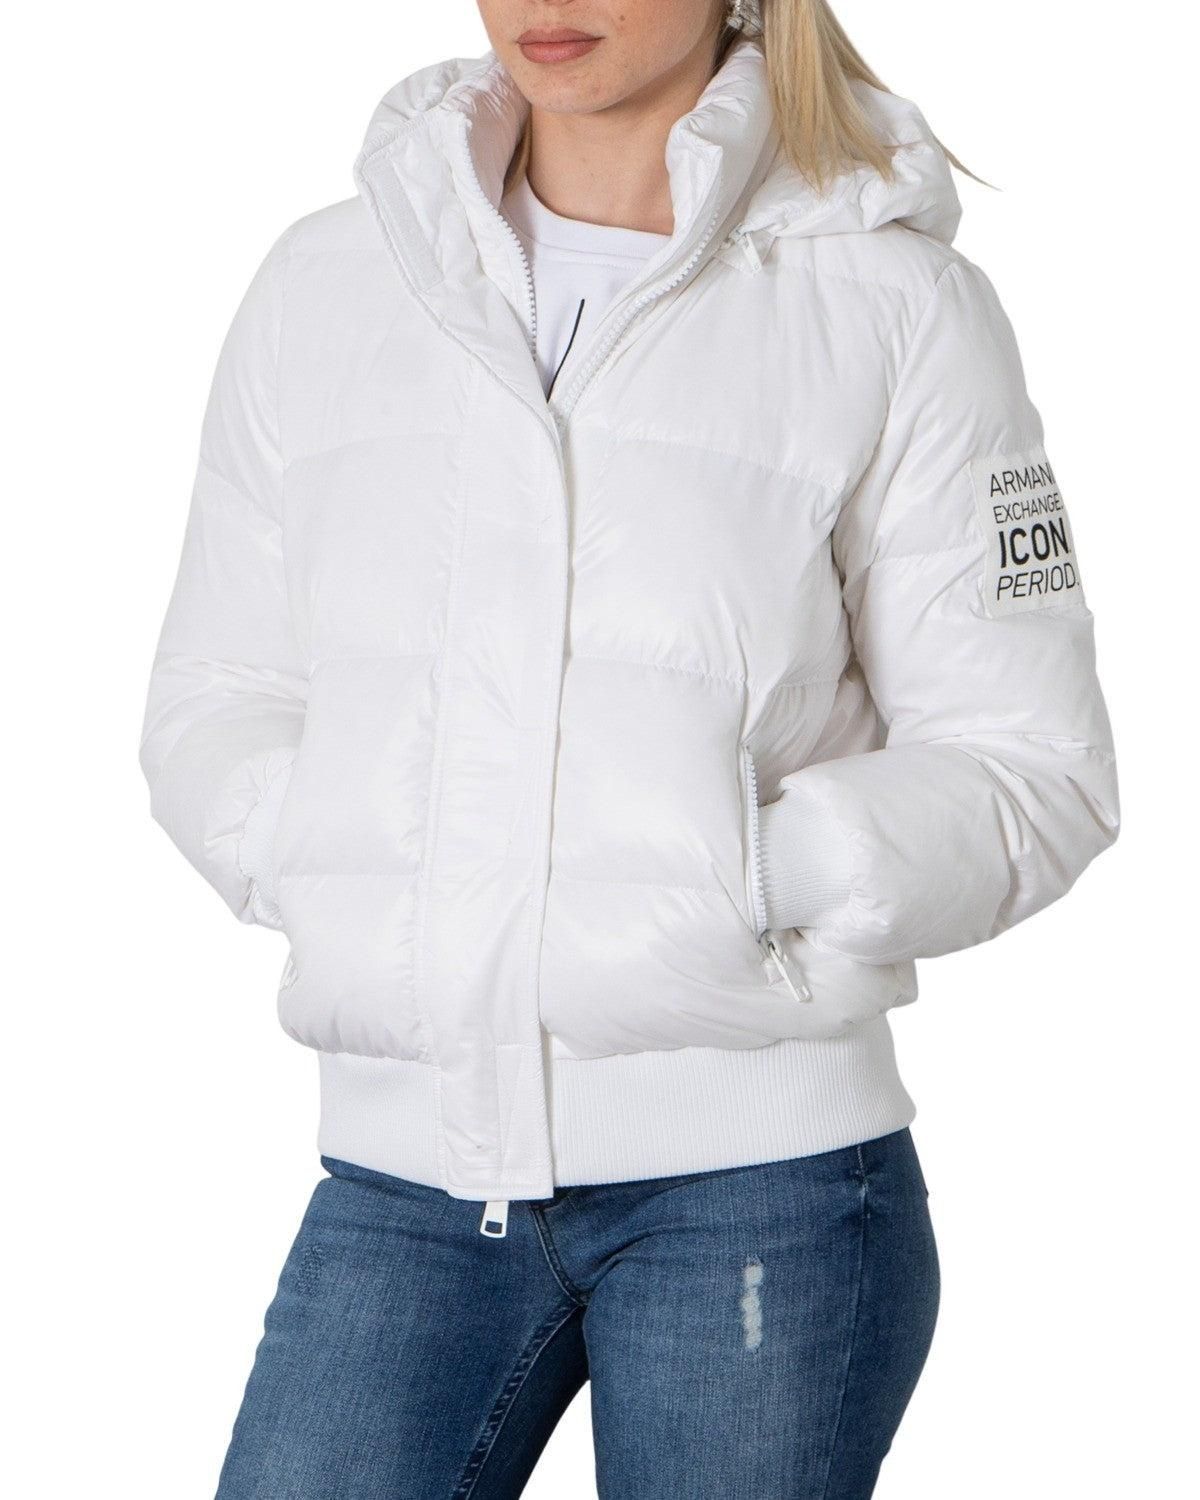 Brand: Armani Exchange
Gender: Women
Type: Jackets
Season: Fall/Winter

PRODUCT DETAIL
• Color: White
• Fastening: With zip
• Sleeves: Long
• Collar: Hood
• Pockets: Front pockets

COMPOSITION AND MATERIAL
• Composition: -100% polyester